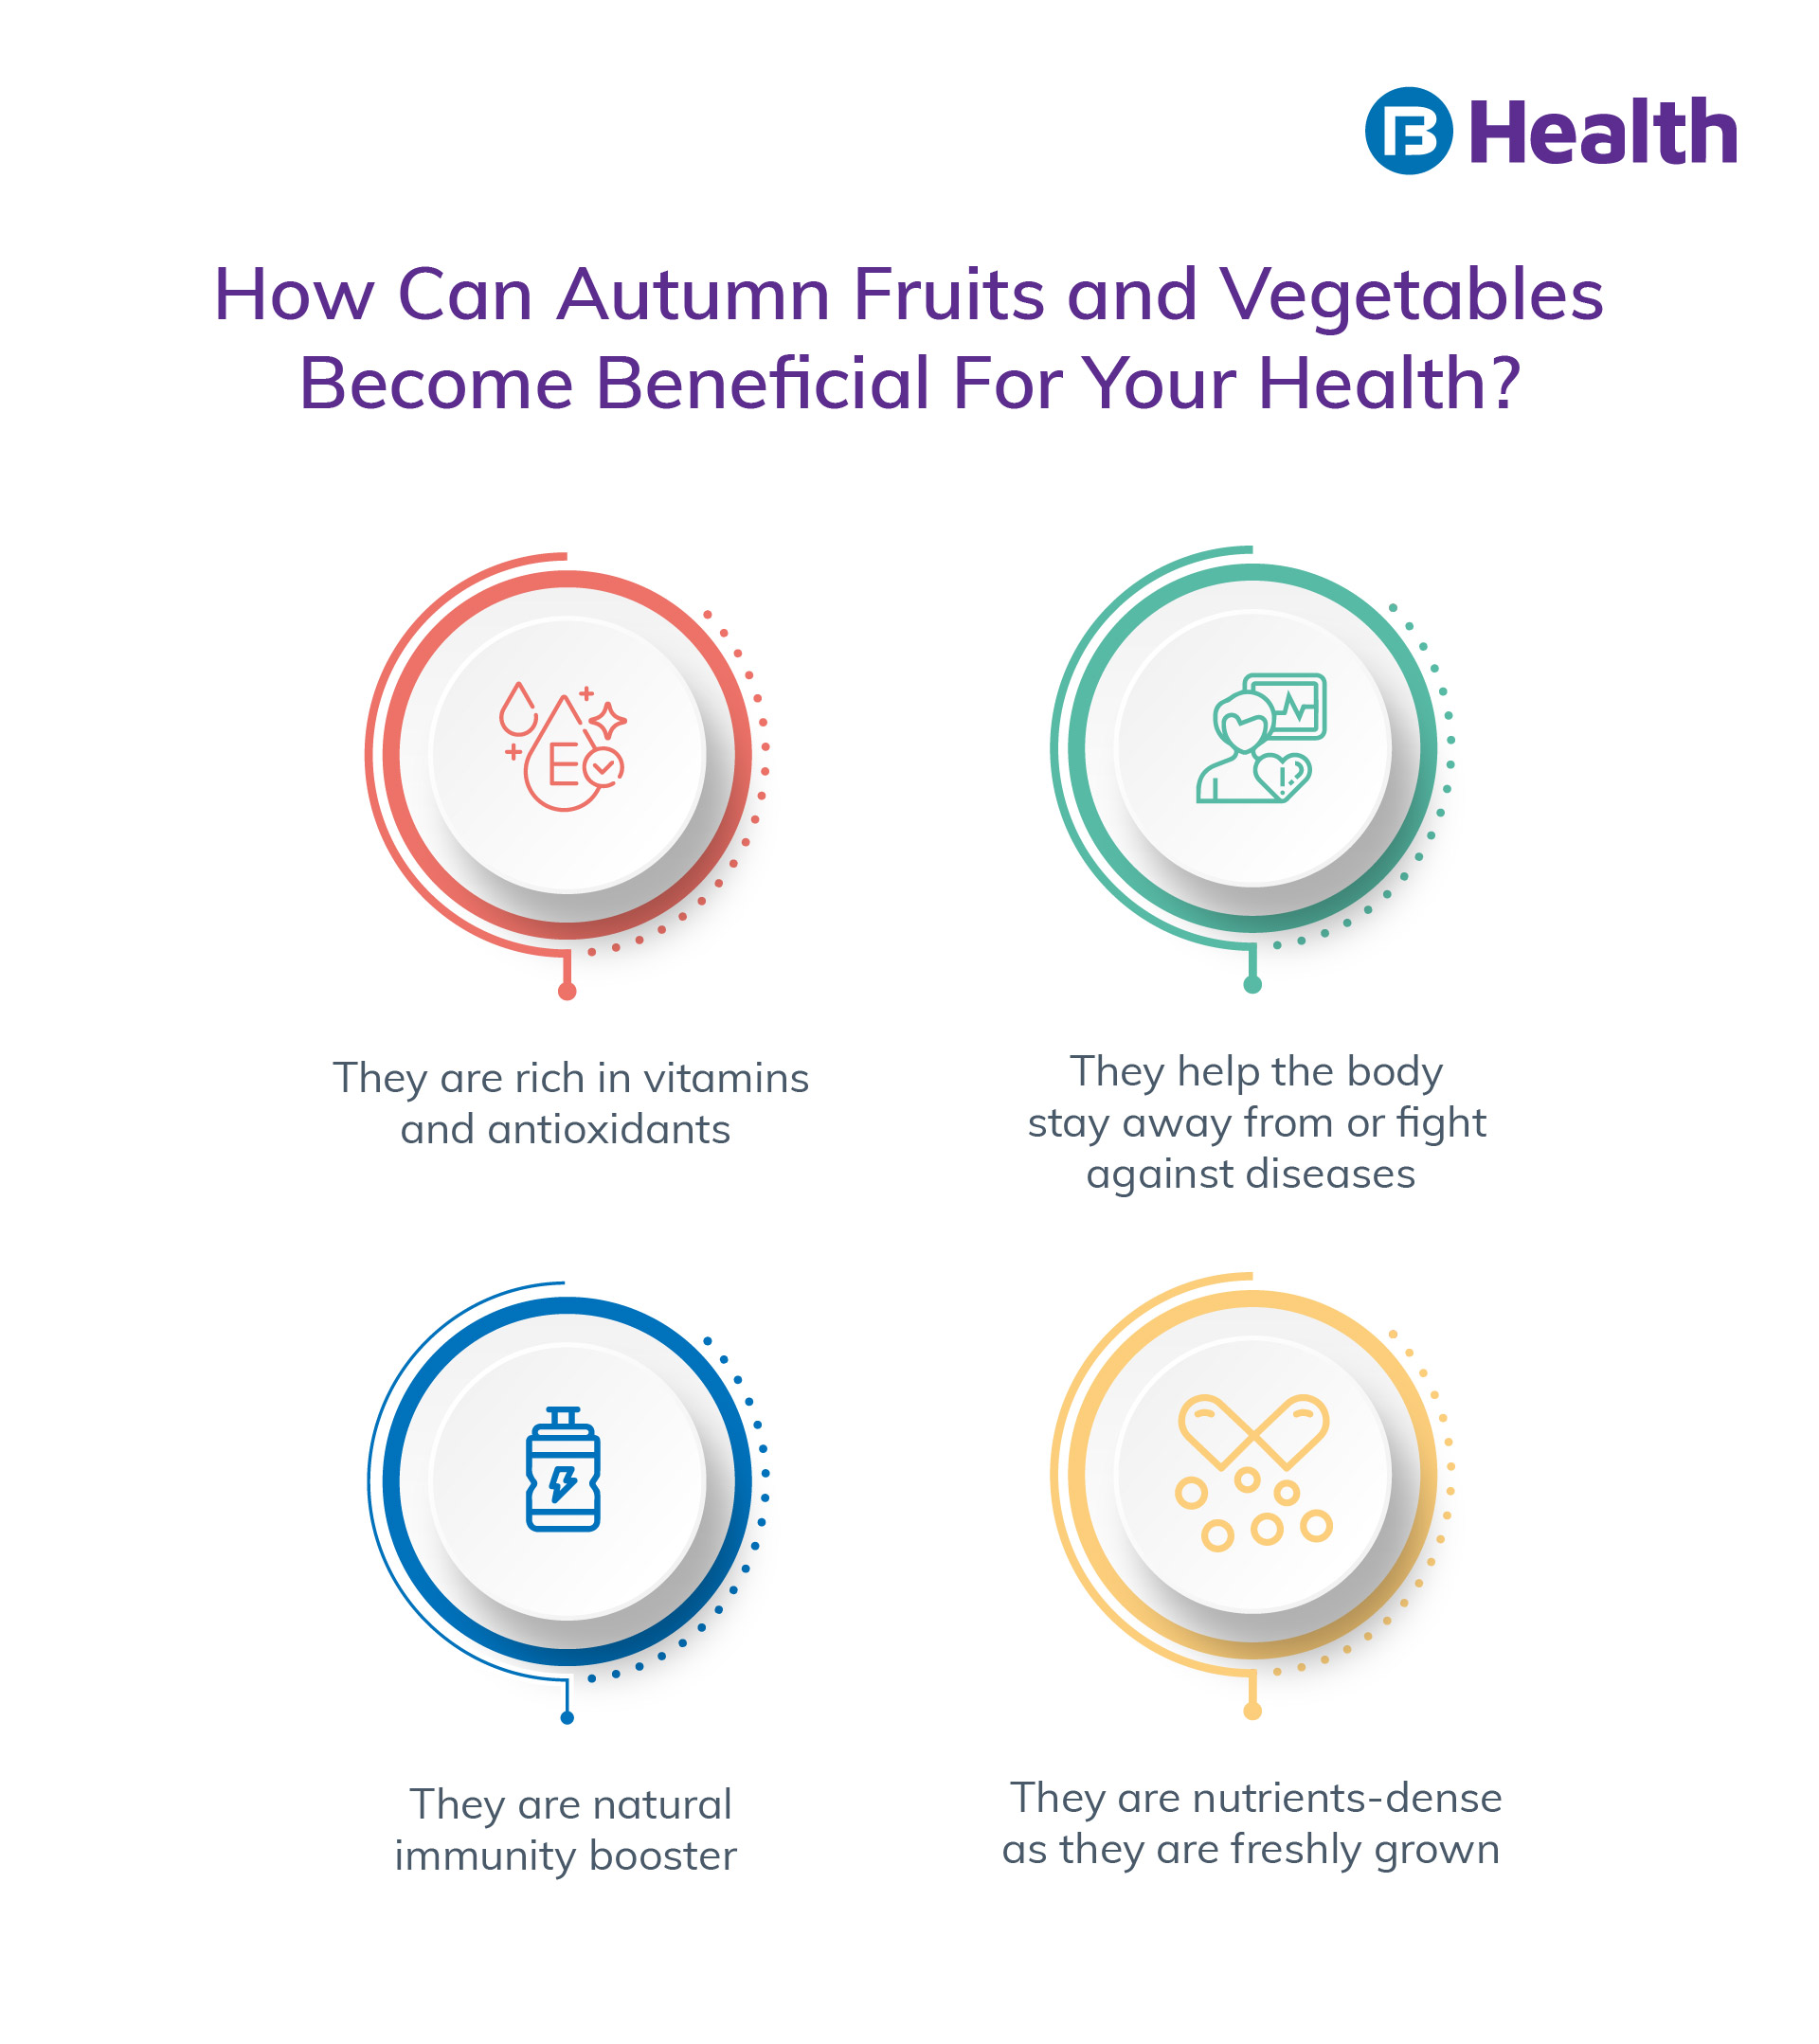 Autumn Fruits and Vegetables benefits